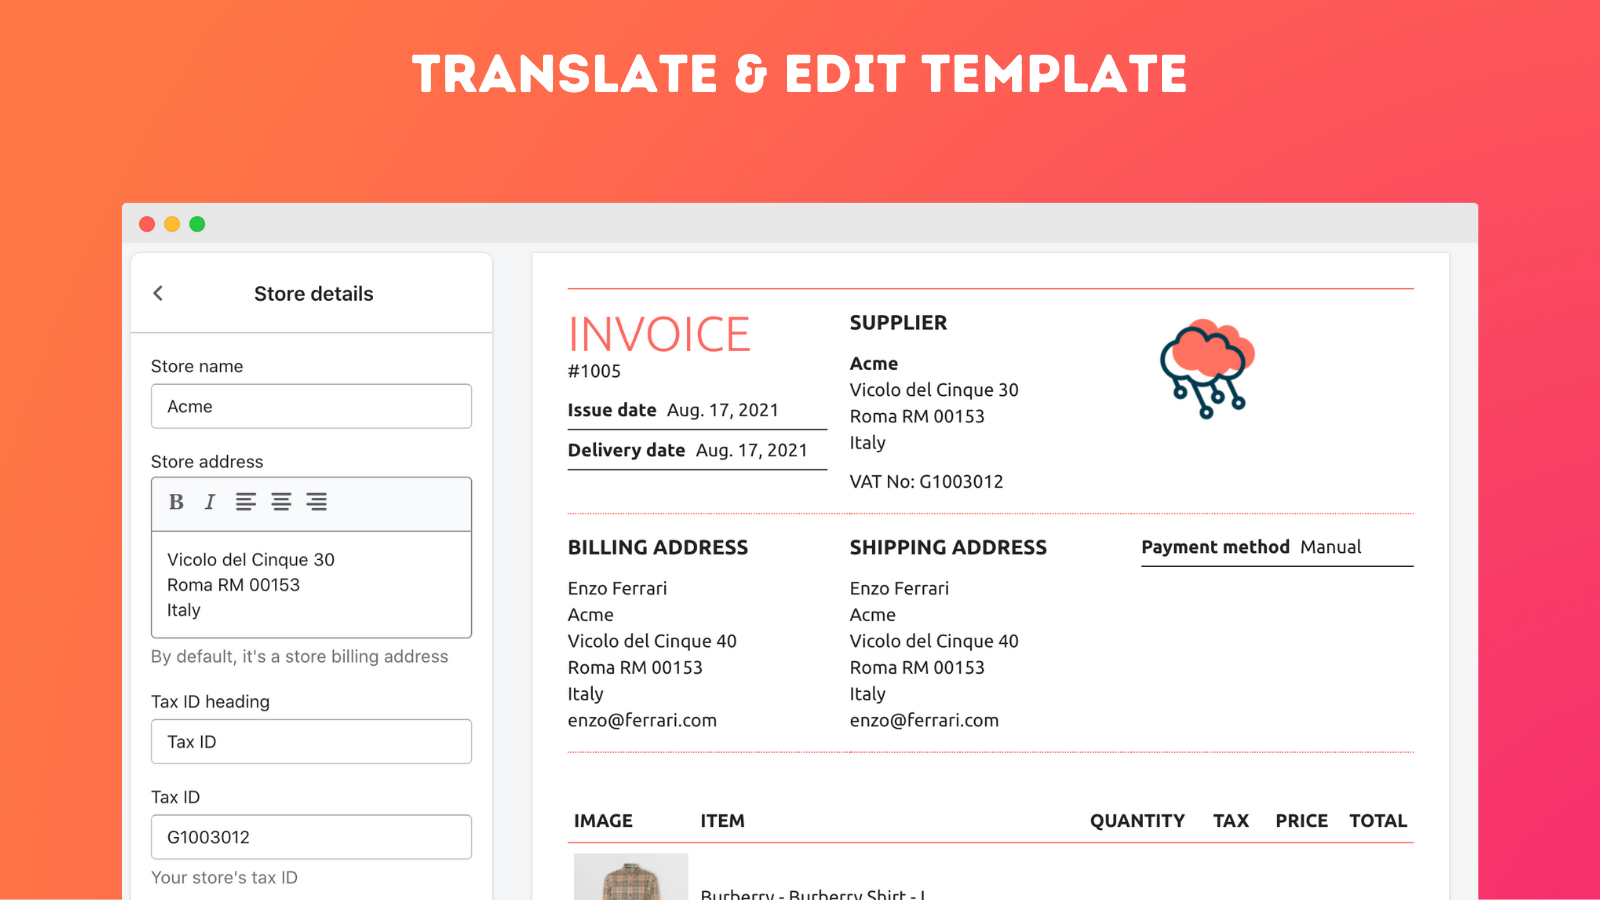 Translate & edit text in template